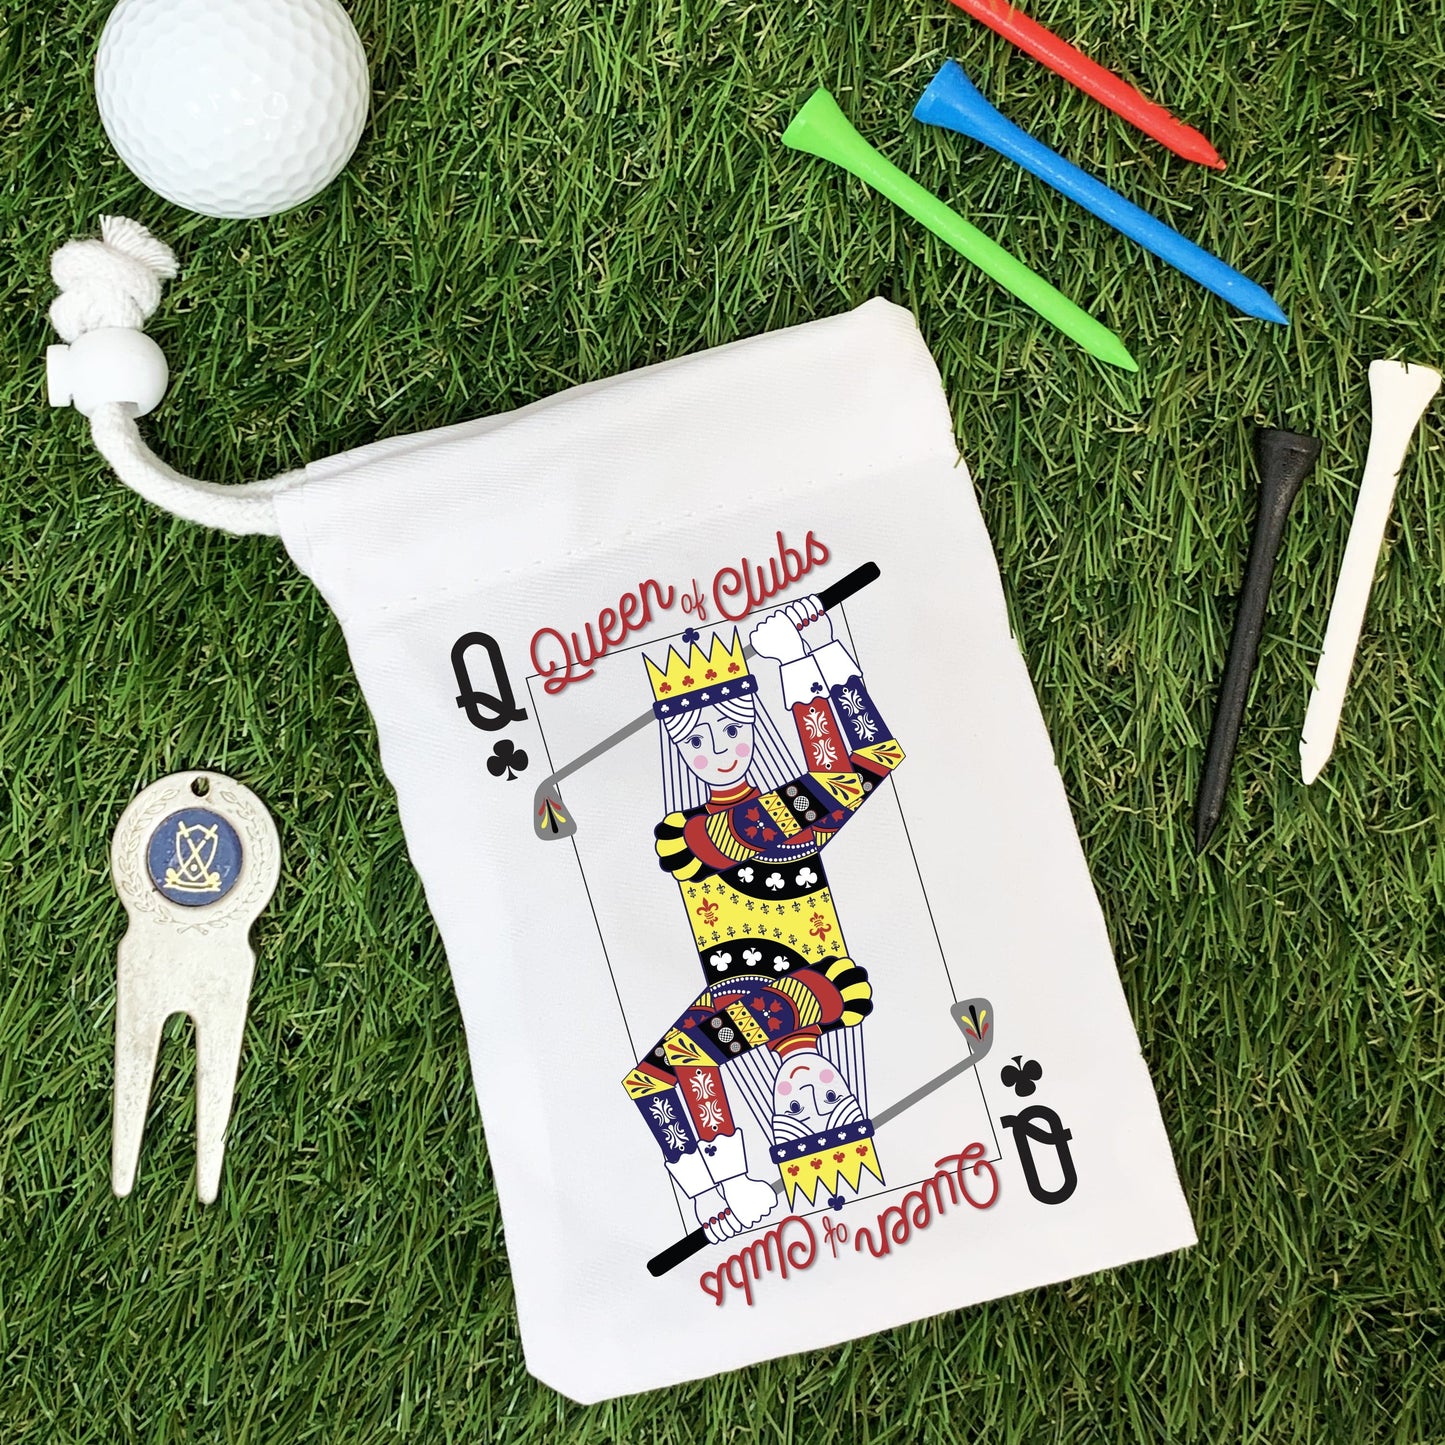 Personalised Queen Of Clubs Golf Tee Bag - Golf Lover Gift - Stocking Filler For Her - Funny Golfing Bag - Golfer Pouch - Hand finished in the UK